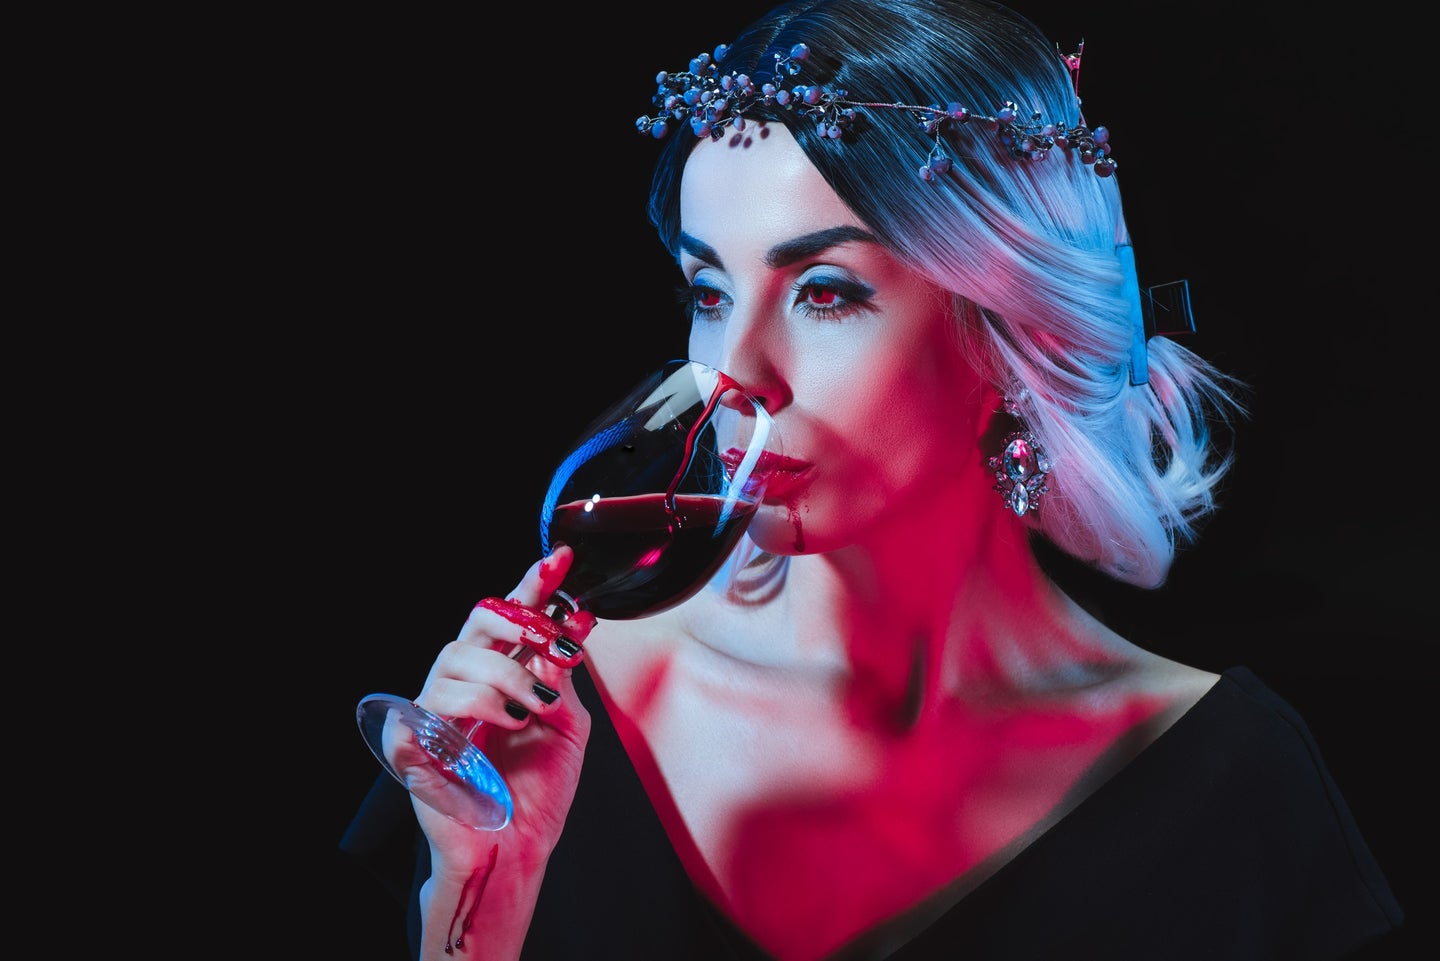 Pale-skinned person with silver hair in black dress to look like vampire sipping on a glass of red wine or blood